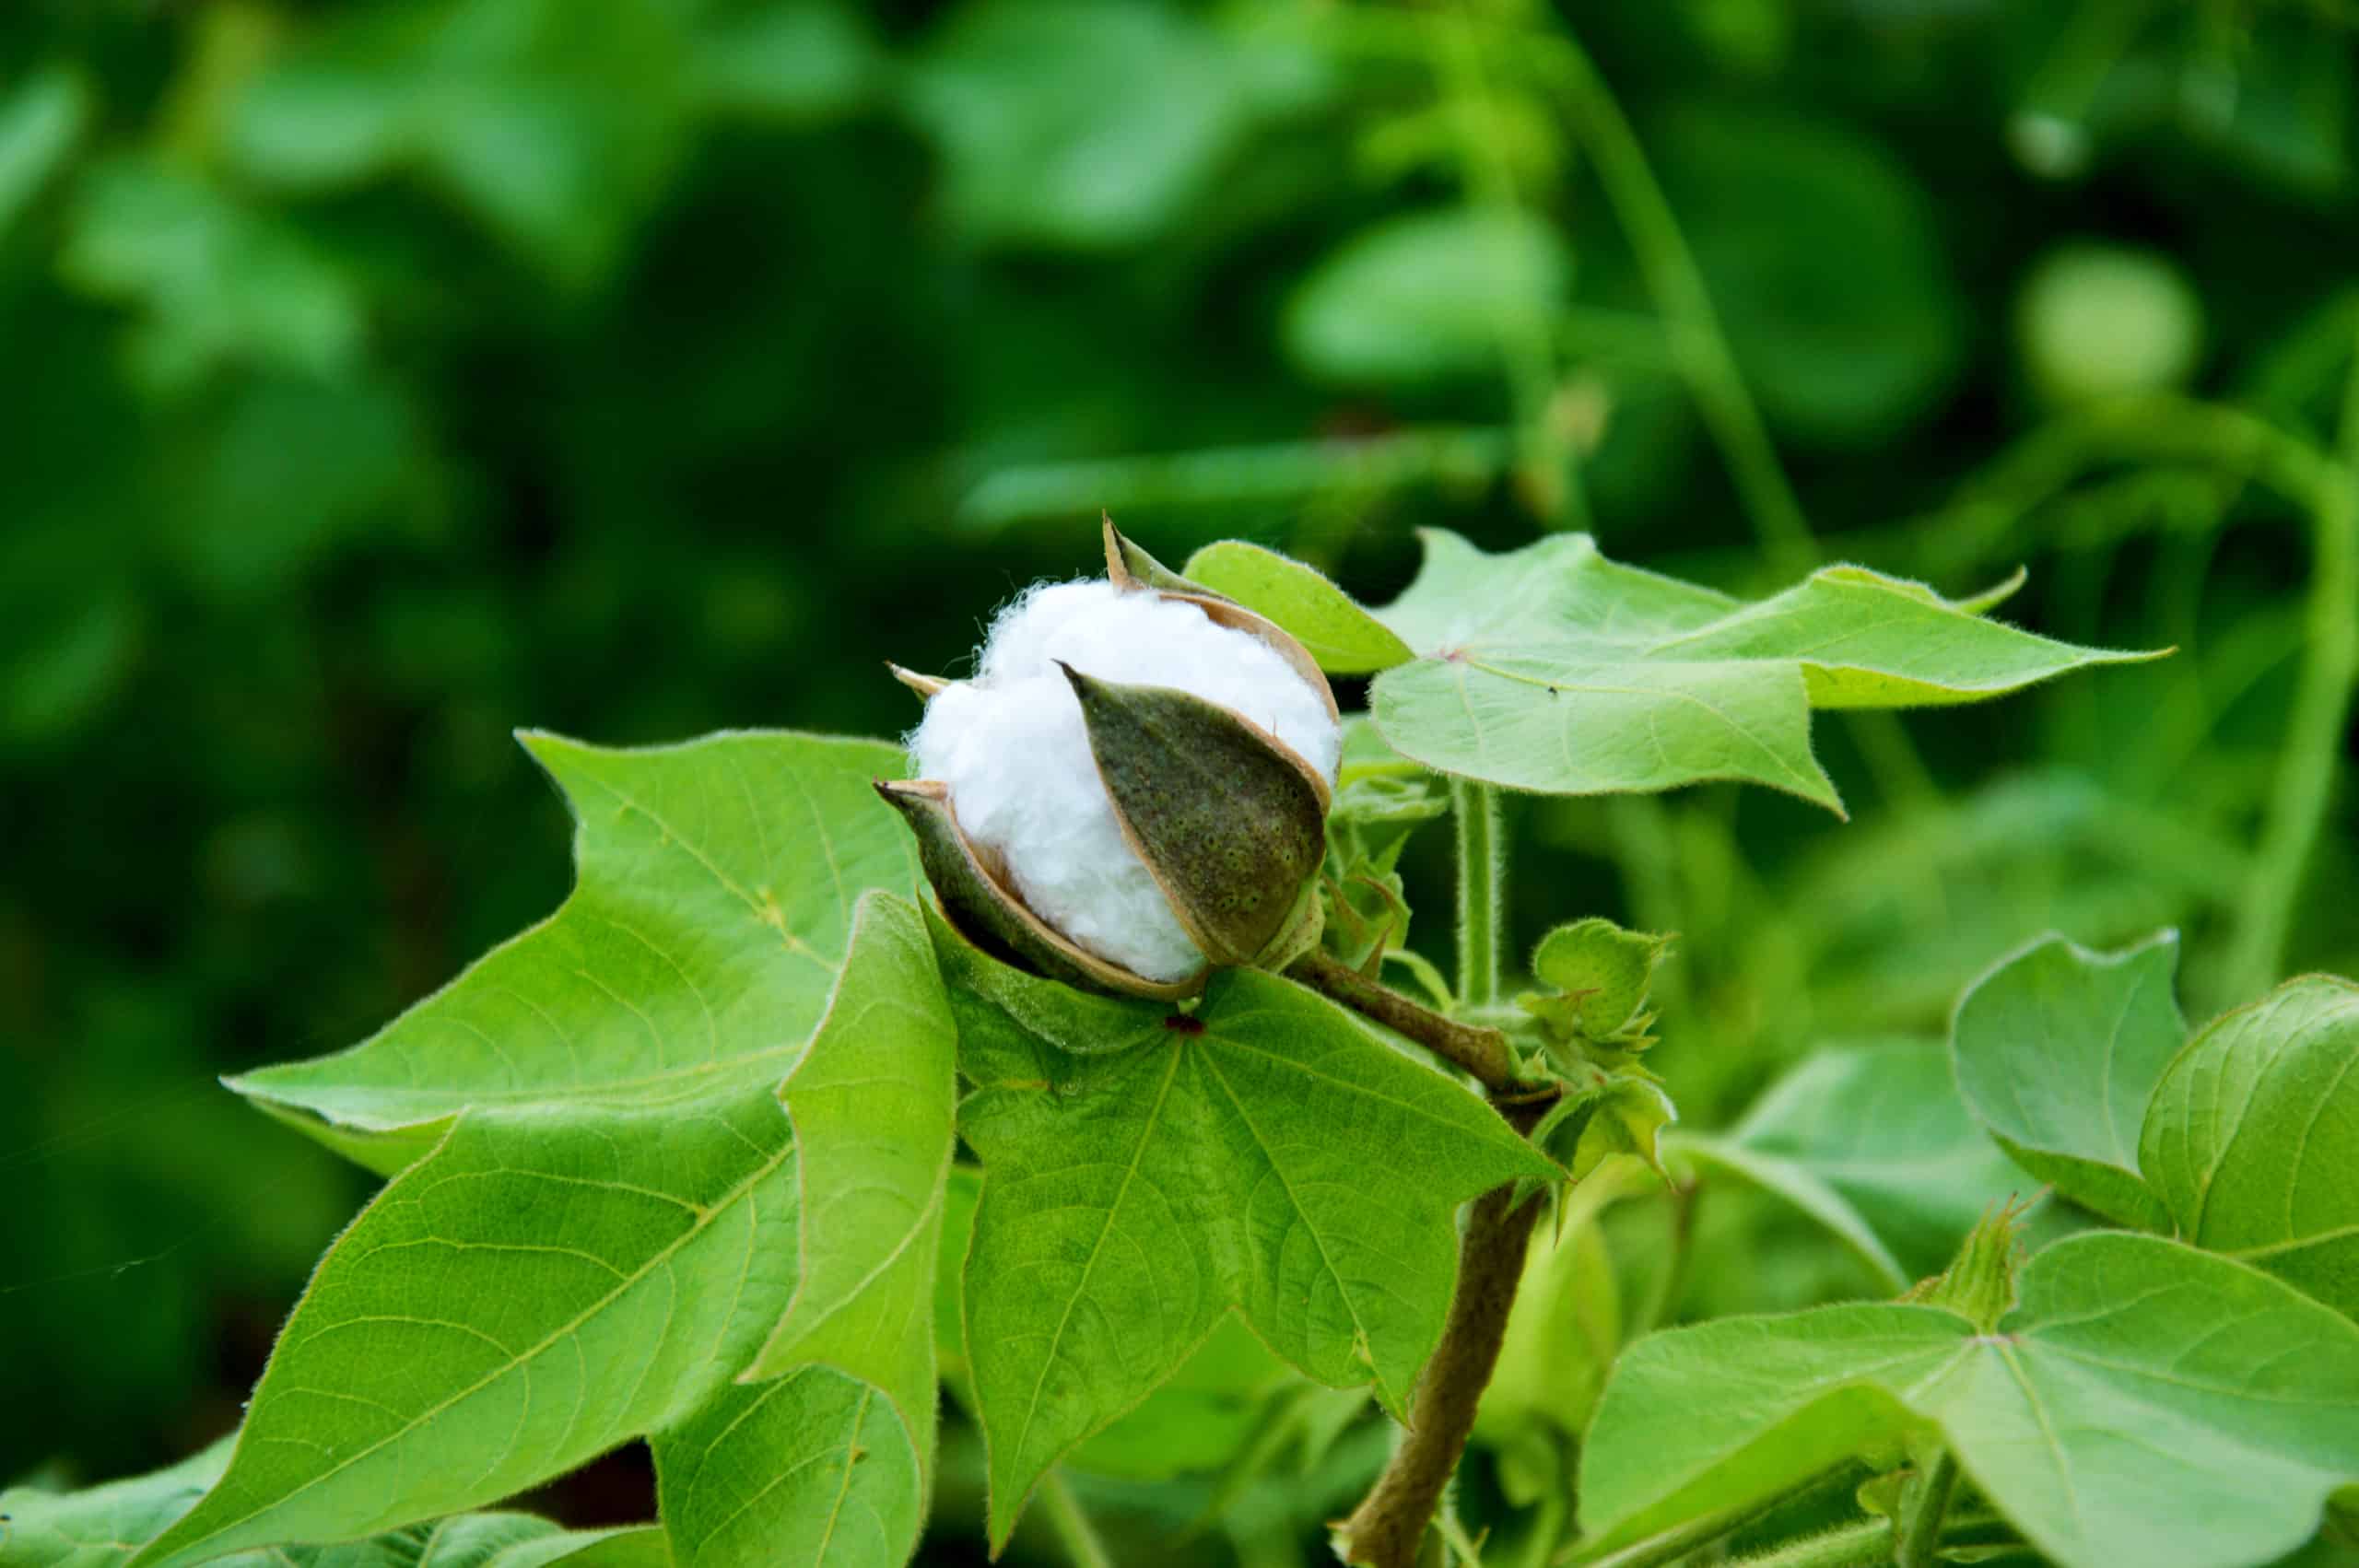 Cotton boll growing on a green plant with large leaves